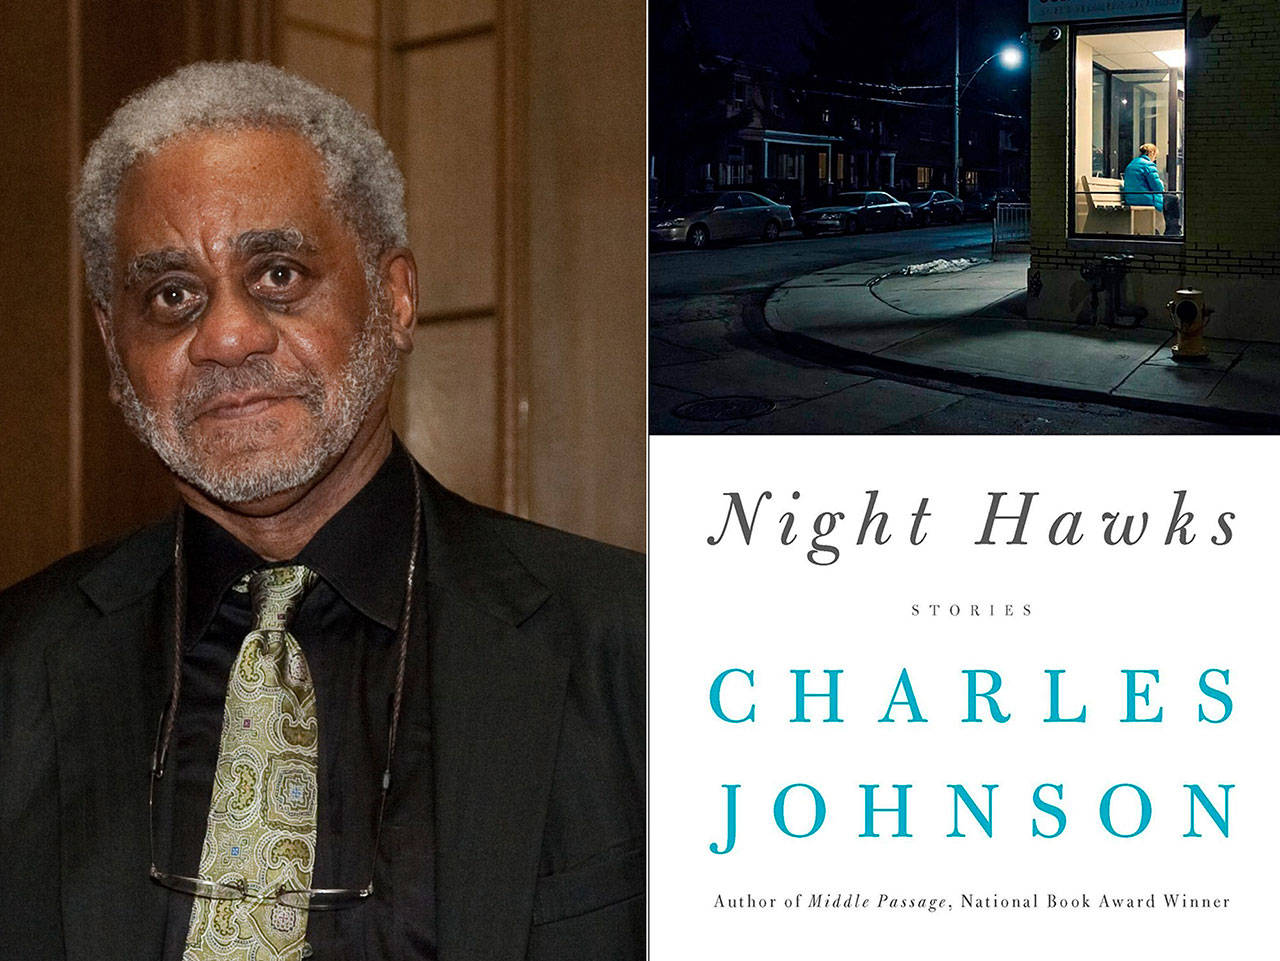 Images courtesy of Eagle Harbor Book Company | Seattle author and National Book Award Winner Charles Johnson will visit Eagle Harbor Book Company at 7 p.m. Thursday, June 27 to discuss his latest collection of short stories “Night Hawks.”